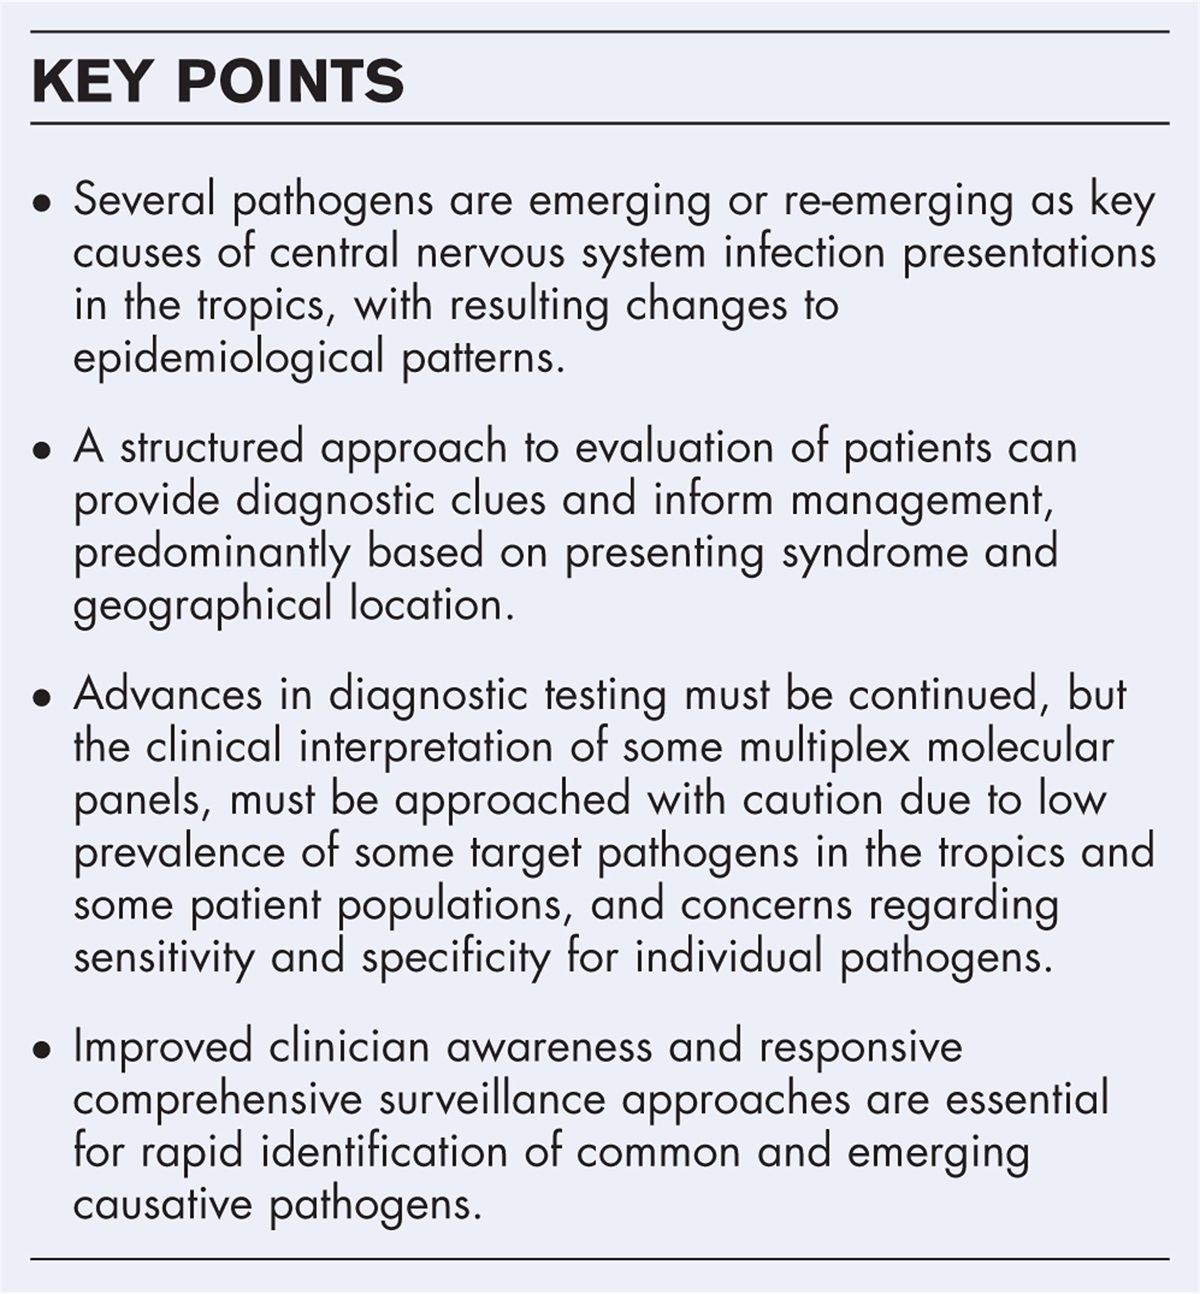 Central nervous system infections in the tropics